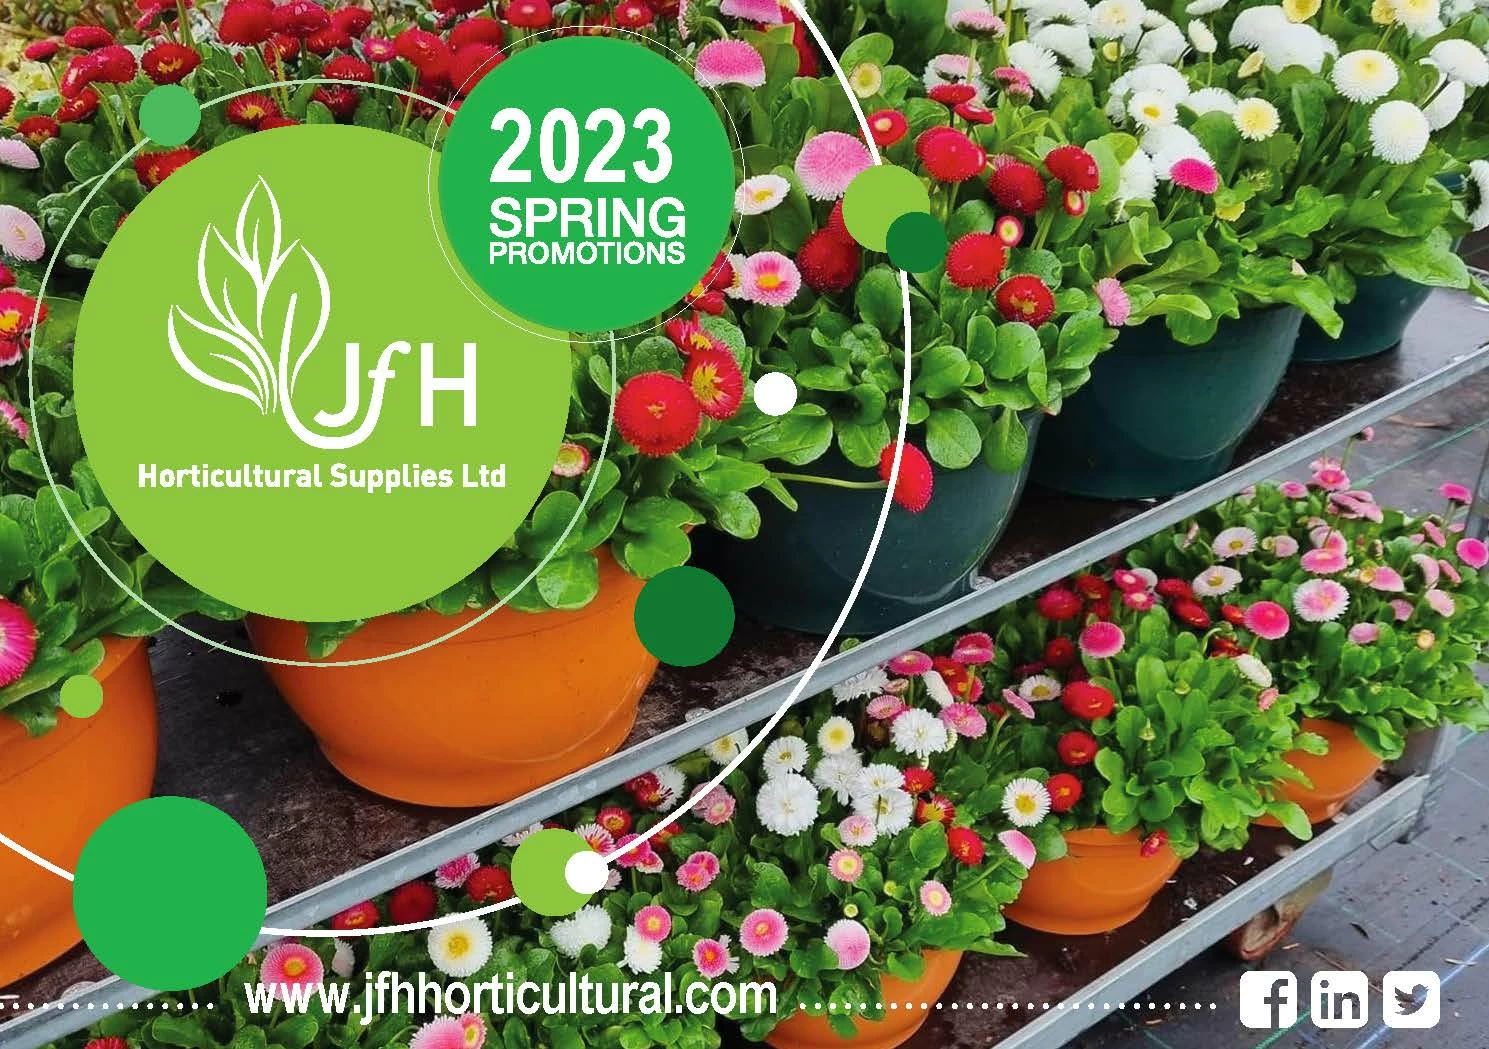 Introducing new products in our Spring 2023 Brochure